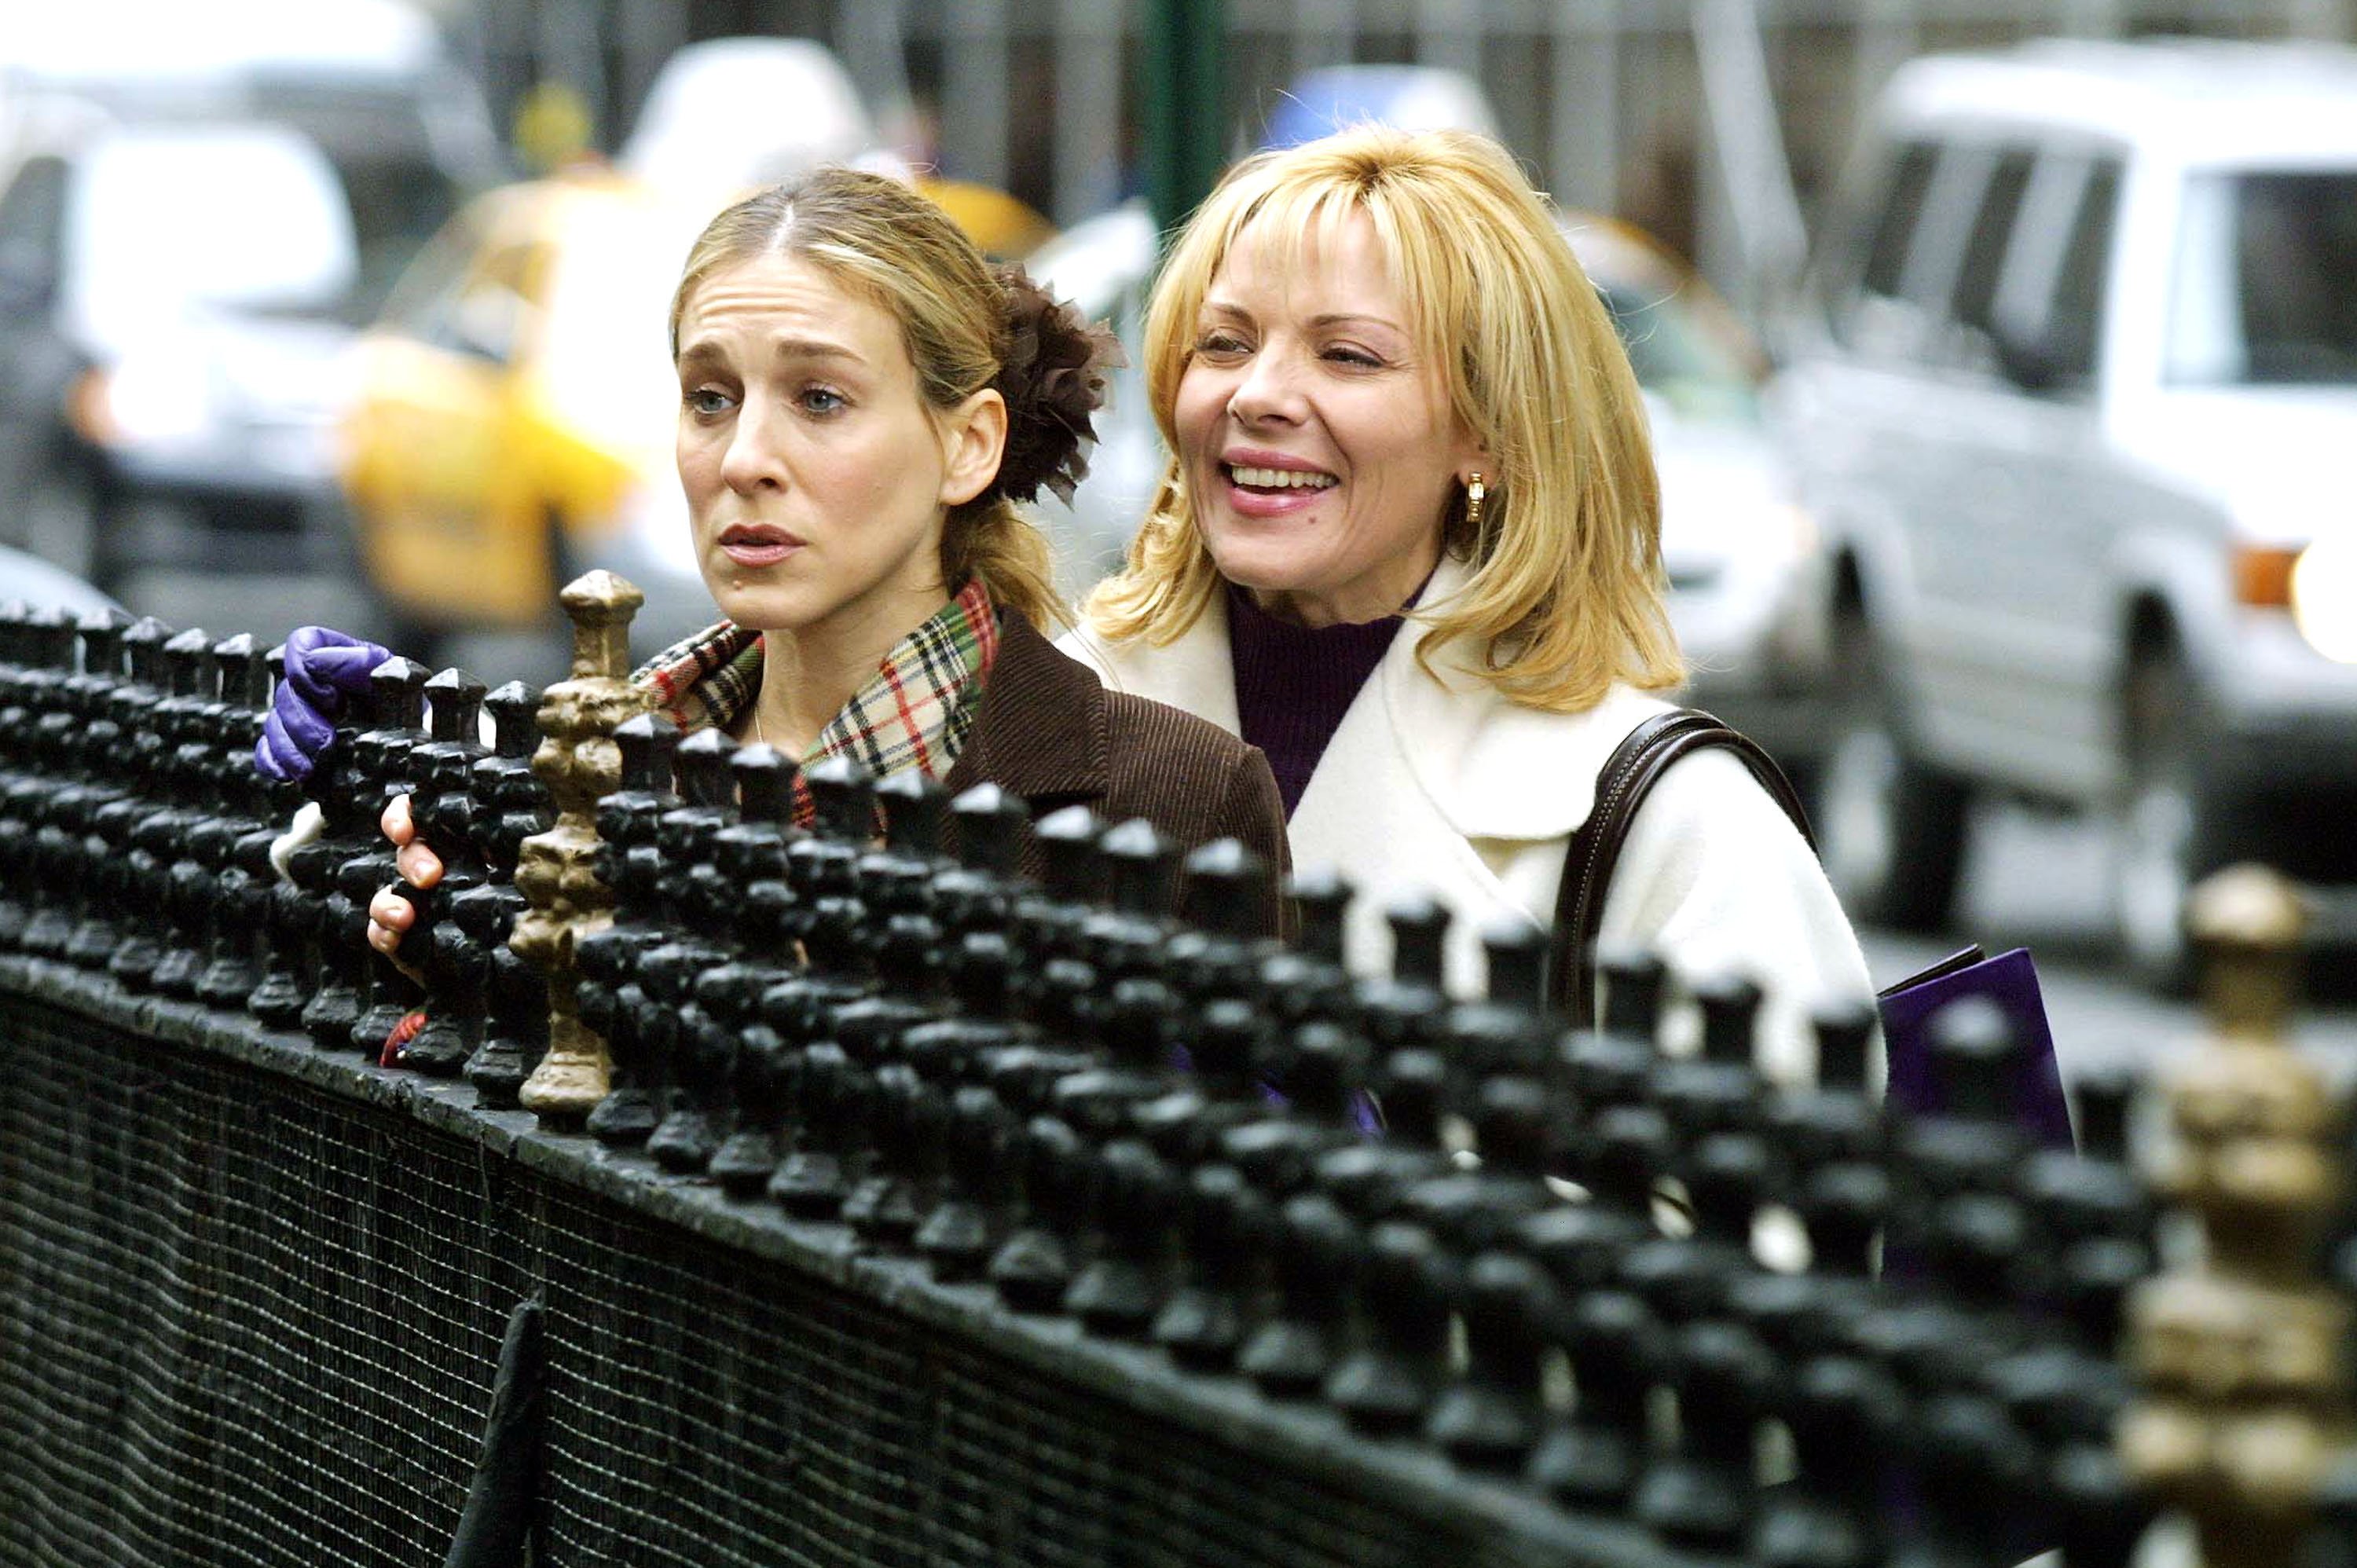 Sarah Jessica Parker and Kim Cattrall in a scene for